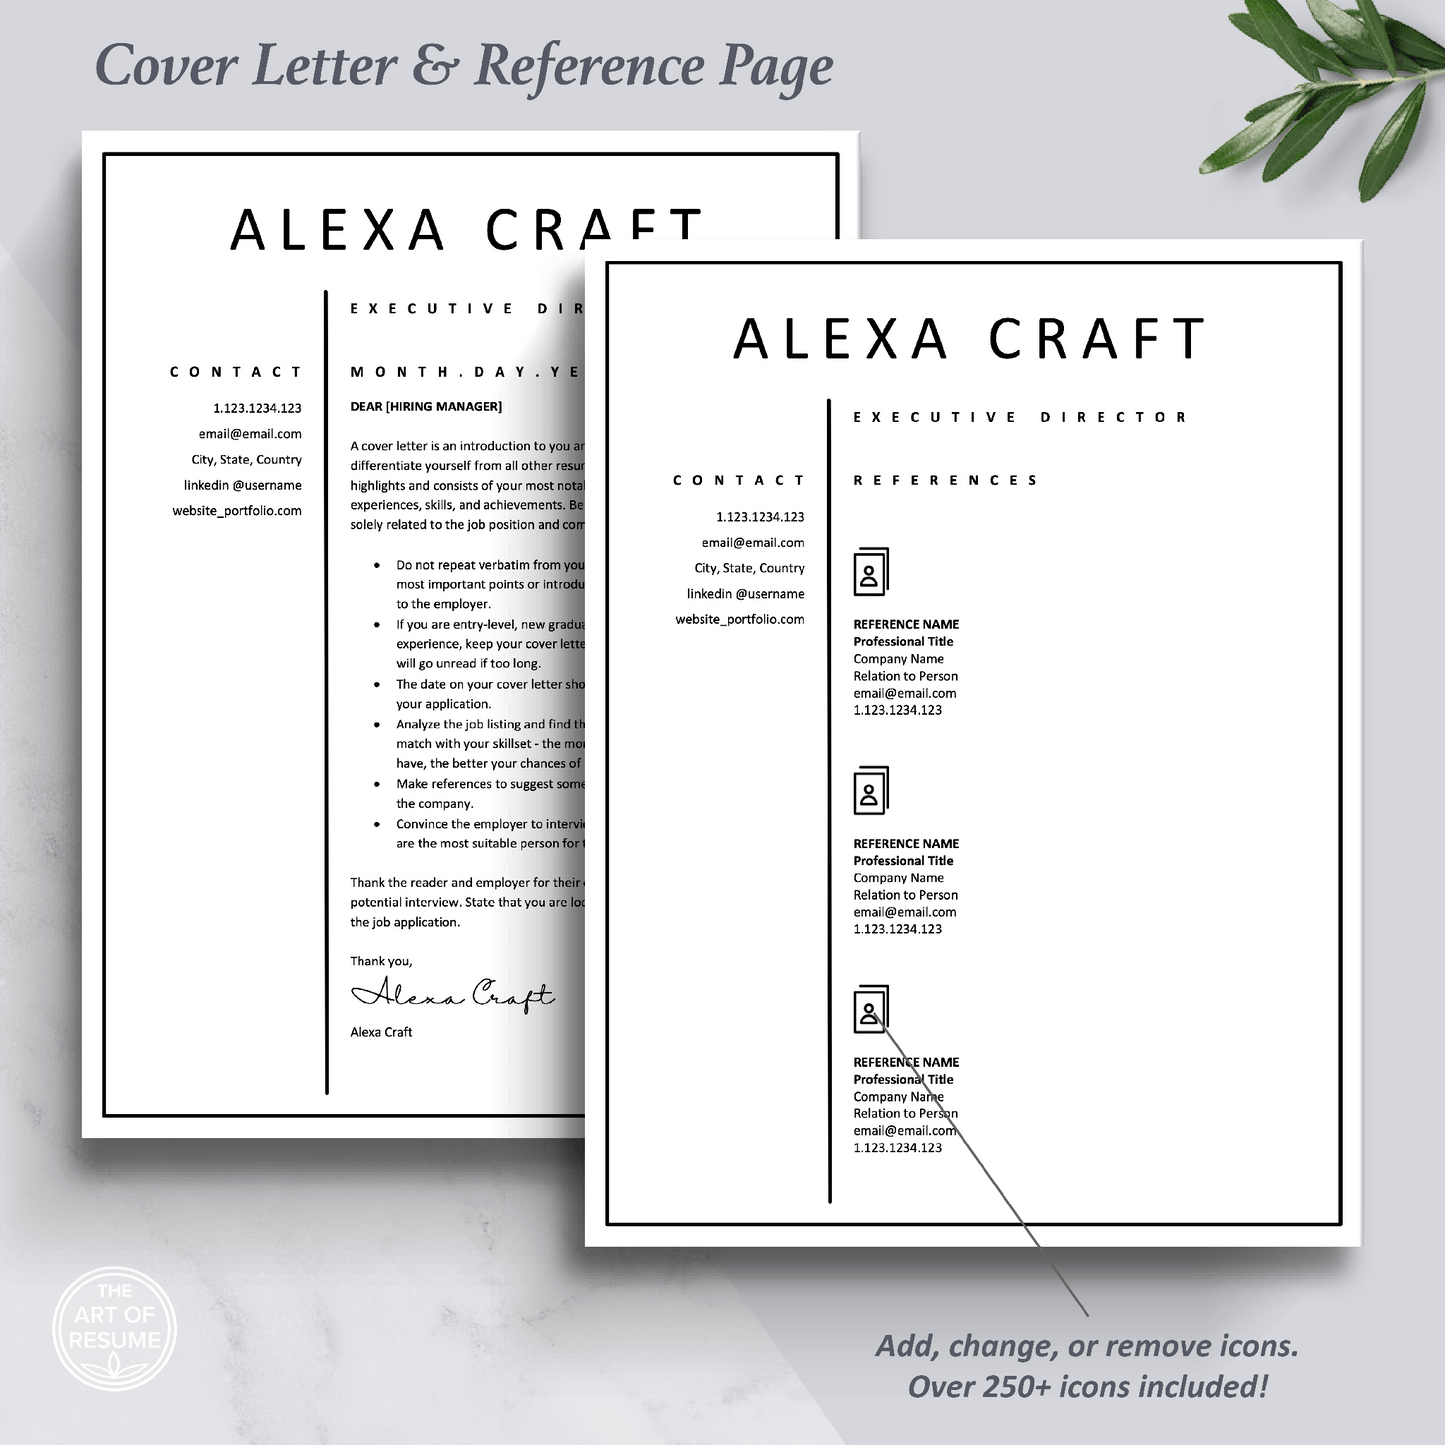 Professional Cover Letter and Reference Page Design Template, Instant Download Bundle for Apple Pages and Microsoft Word, Mac and PC